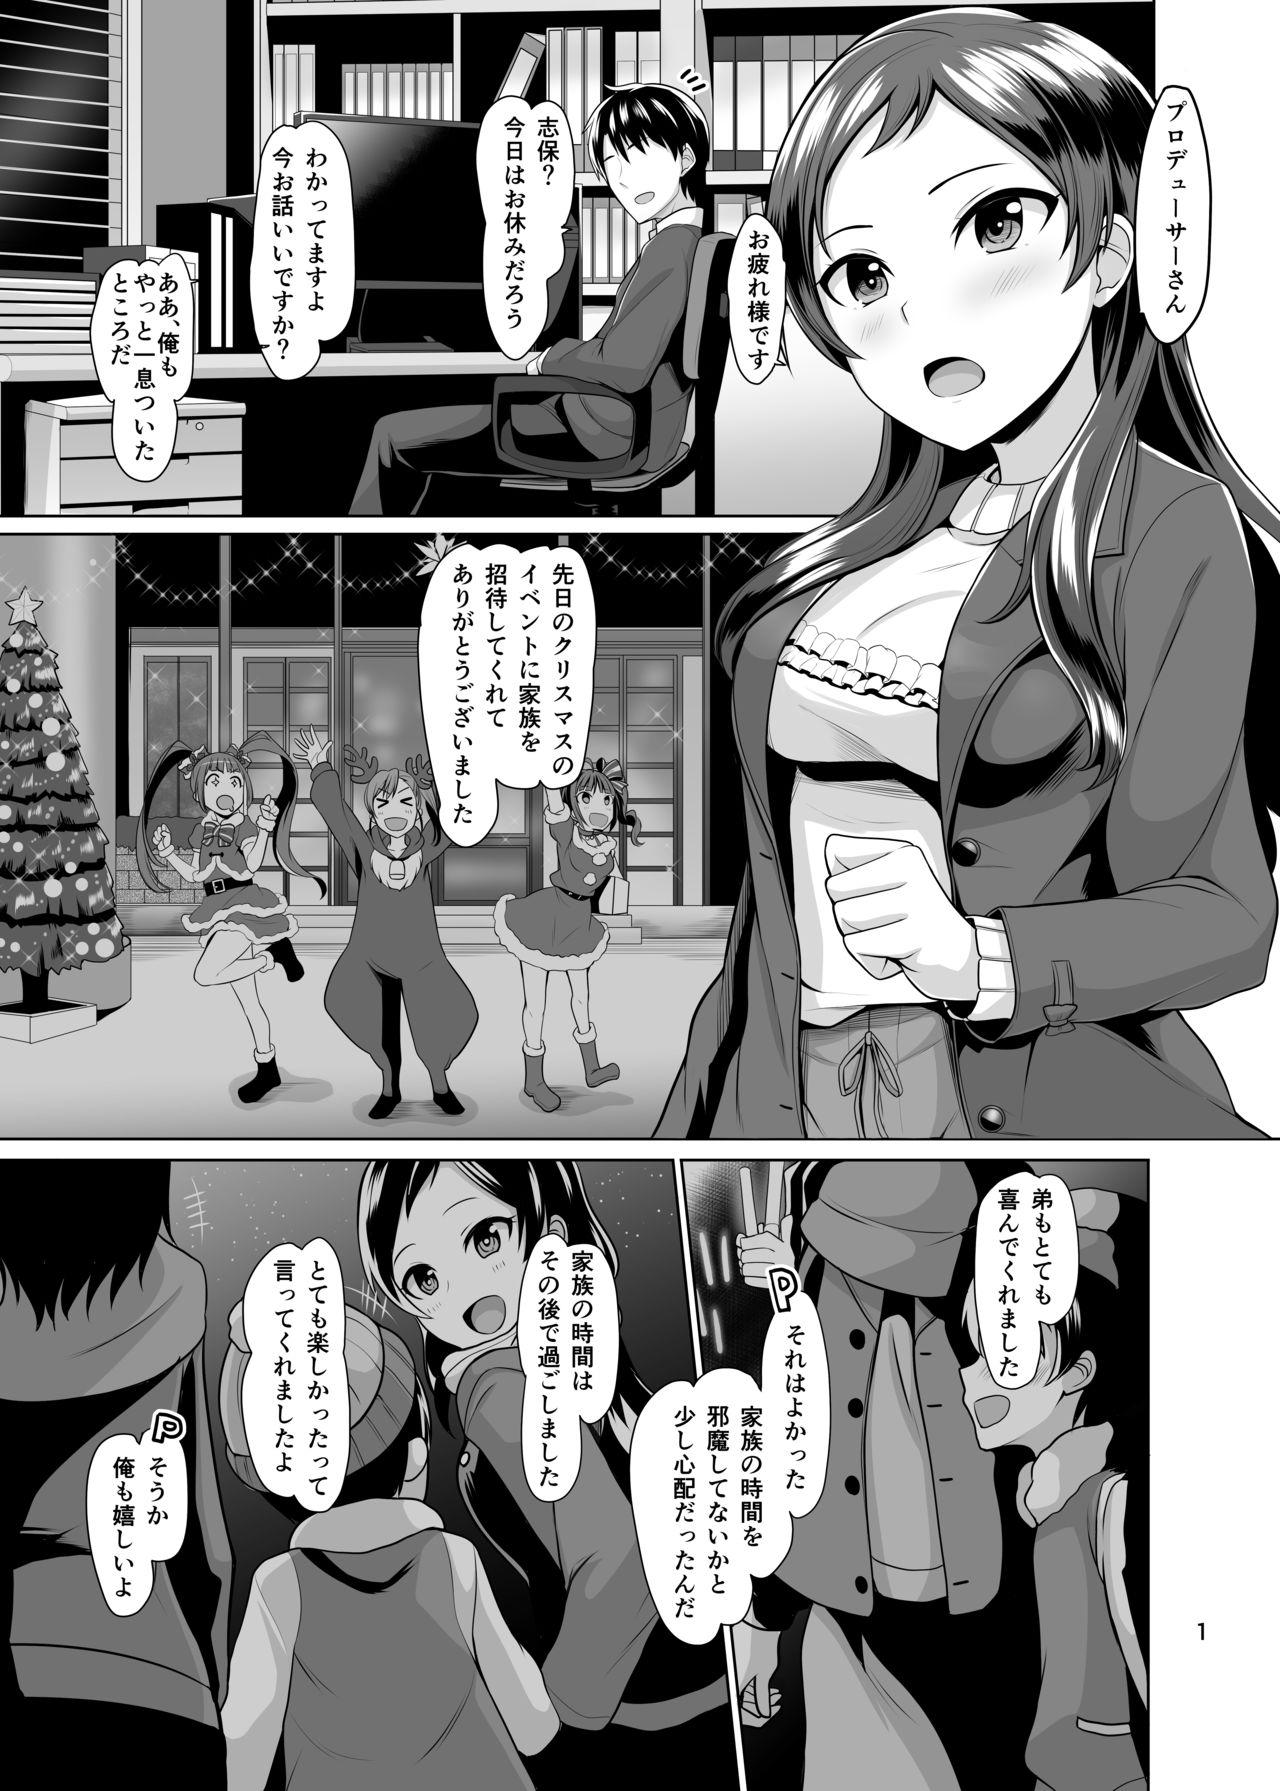 Hardcore Porn The Present is... - The idolmaster Lez - Page 2